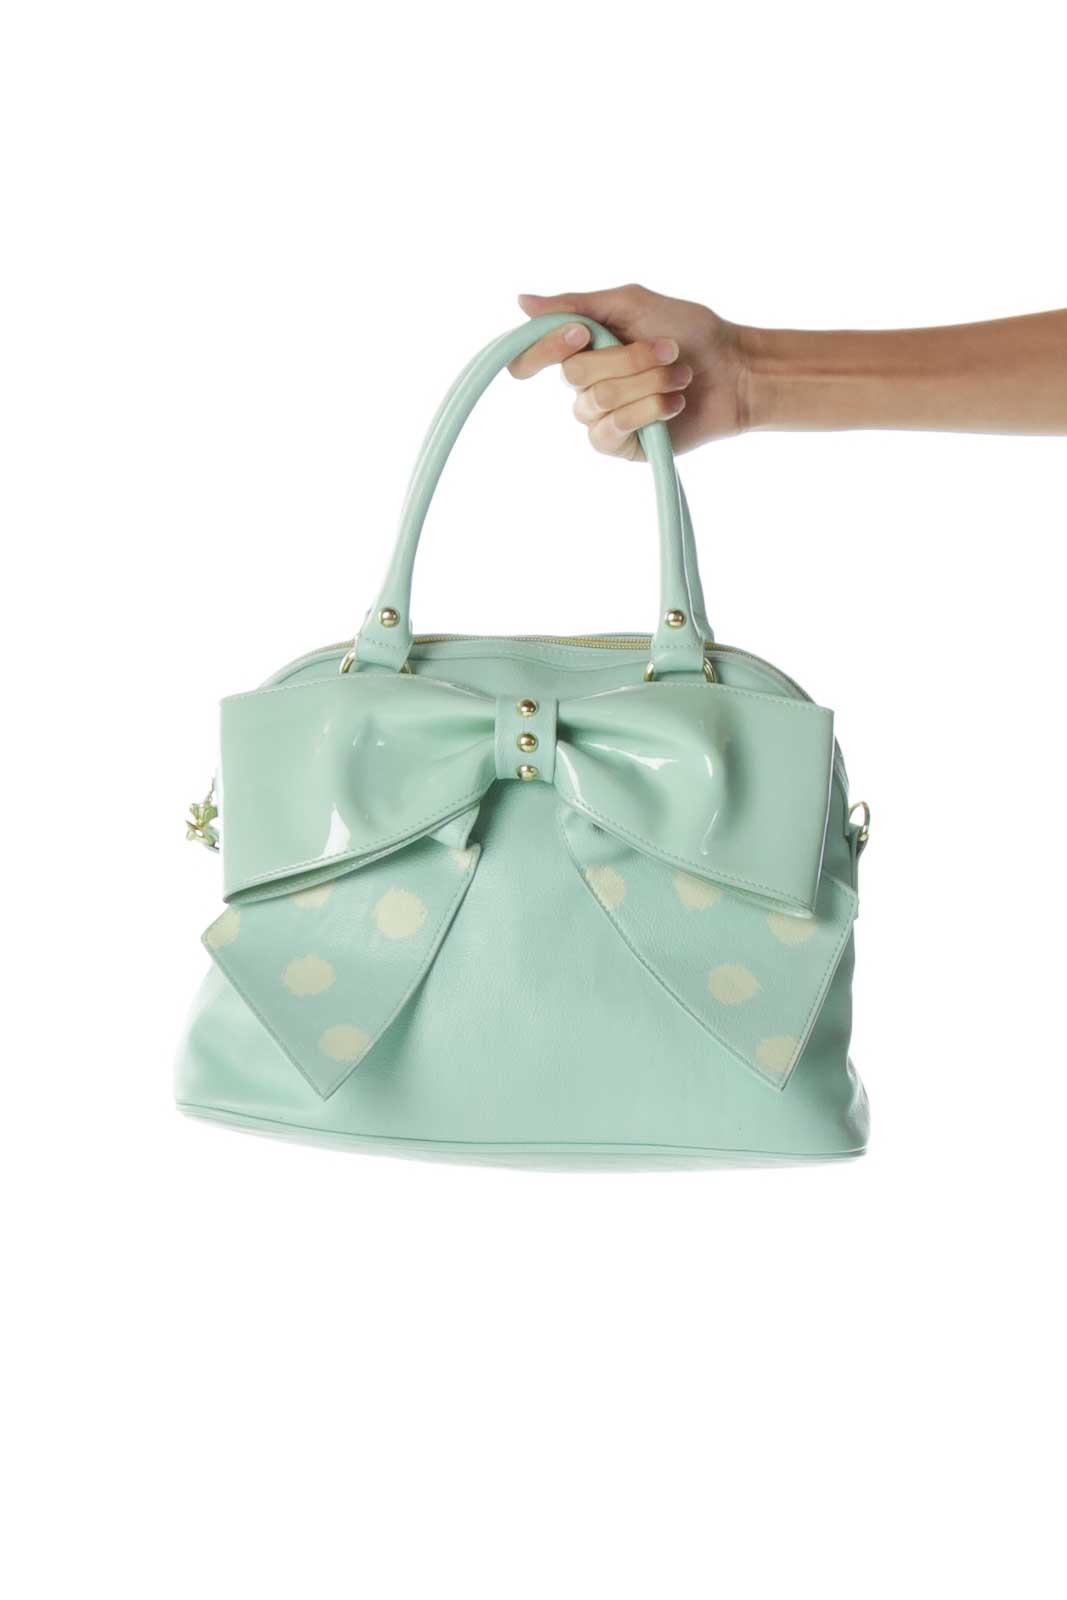 Mint Green Shoulder Bag with Bow Front